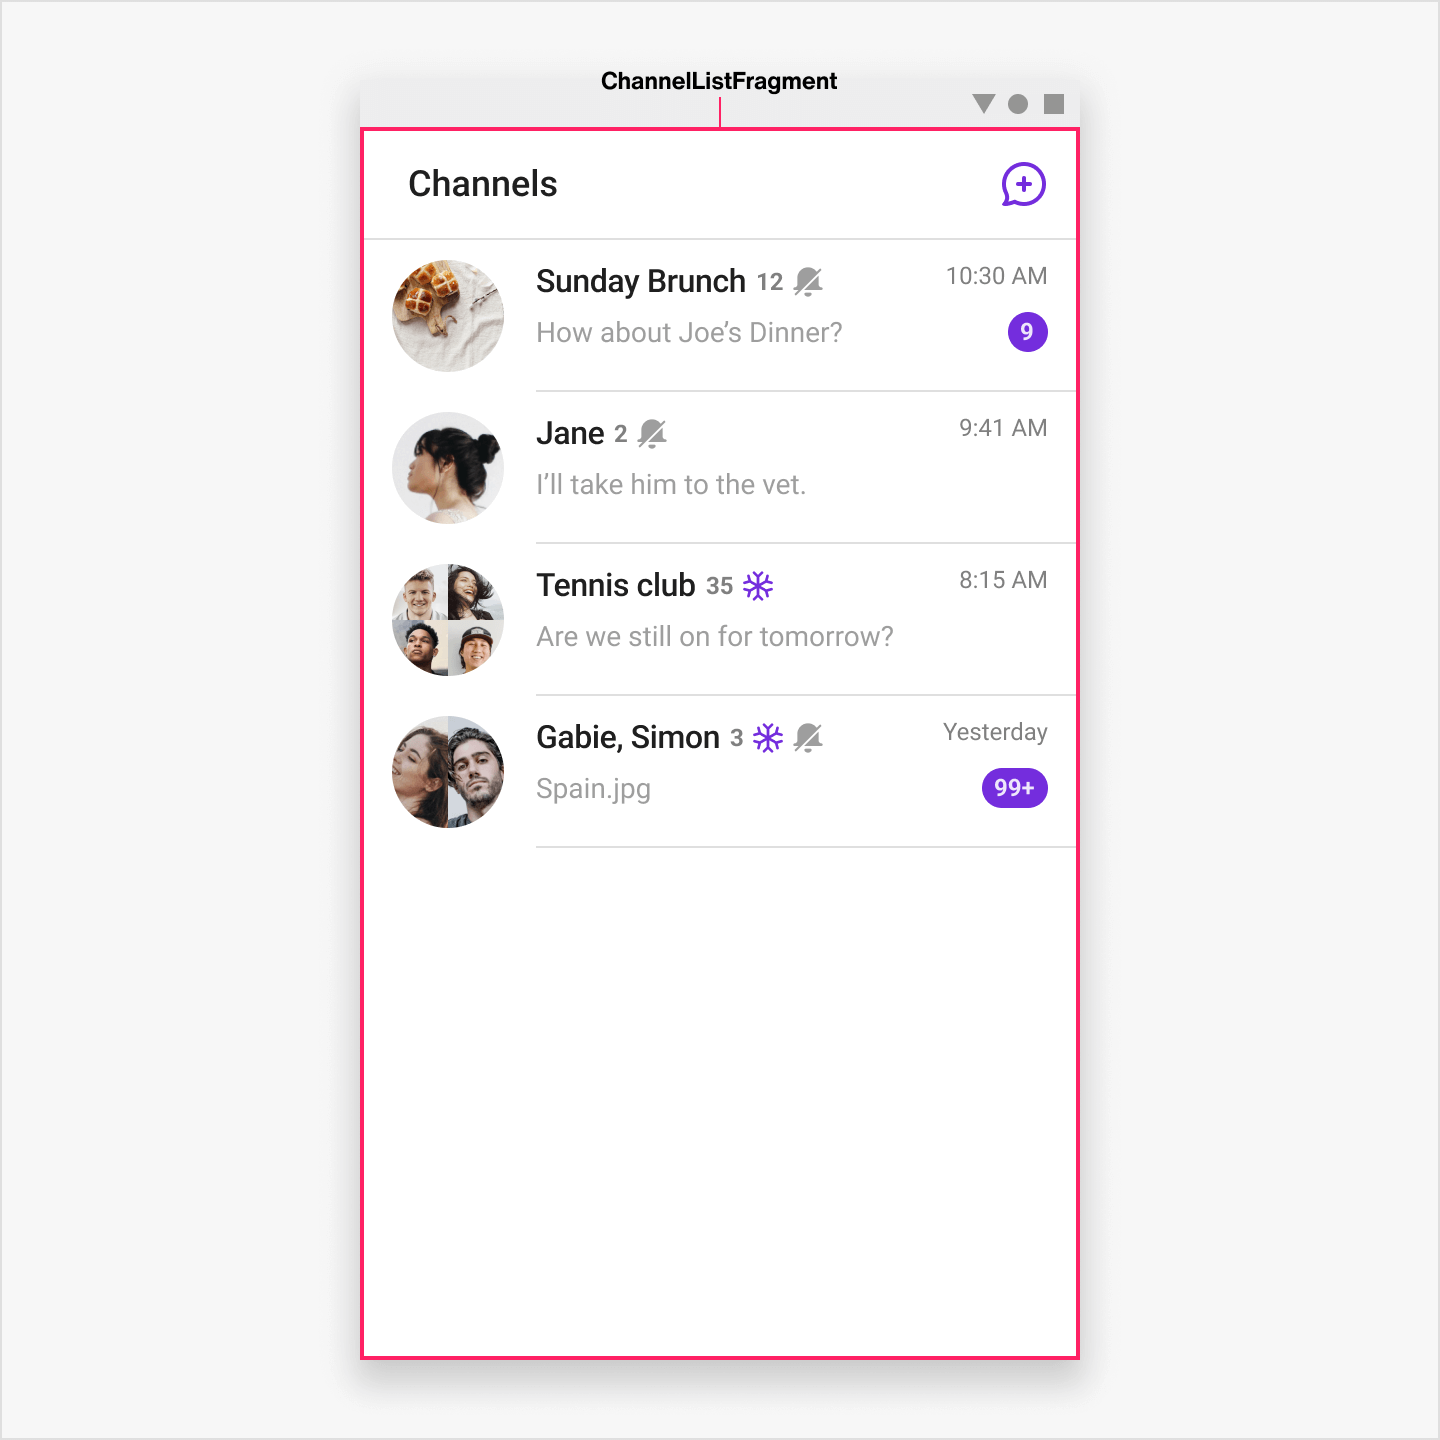 image|a screenshot of a channel list view in the client app